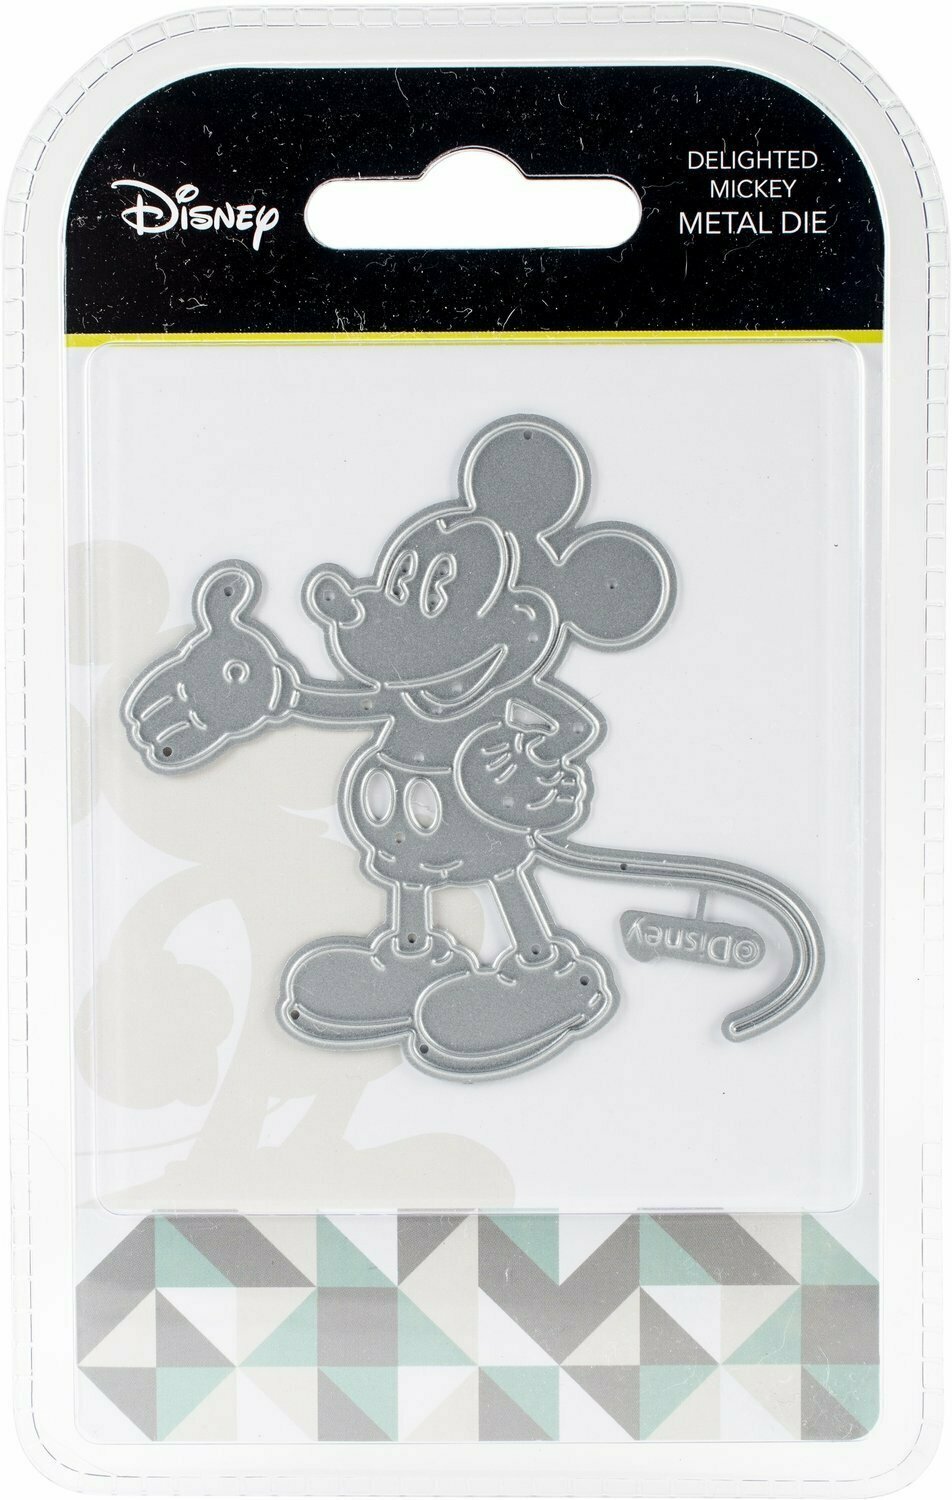 Disney DELIGHTED MICKEY Mickey & Minnie Mouse Die Set